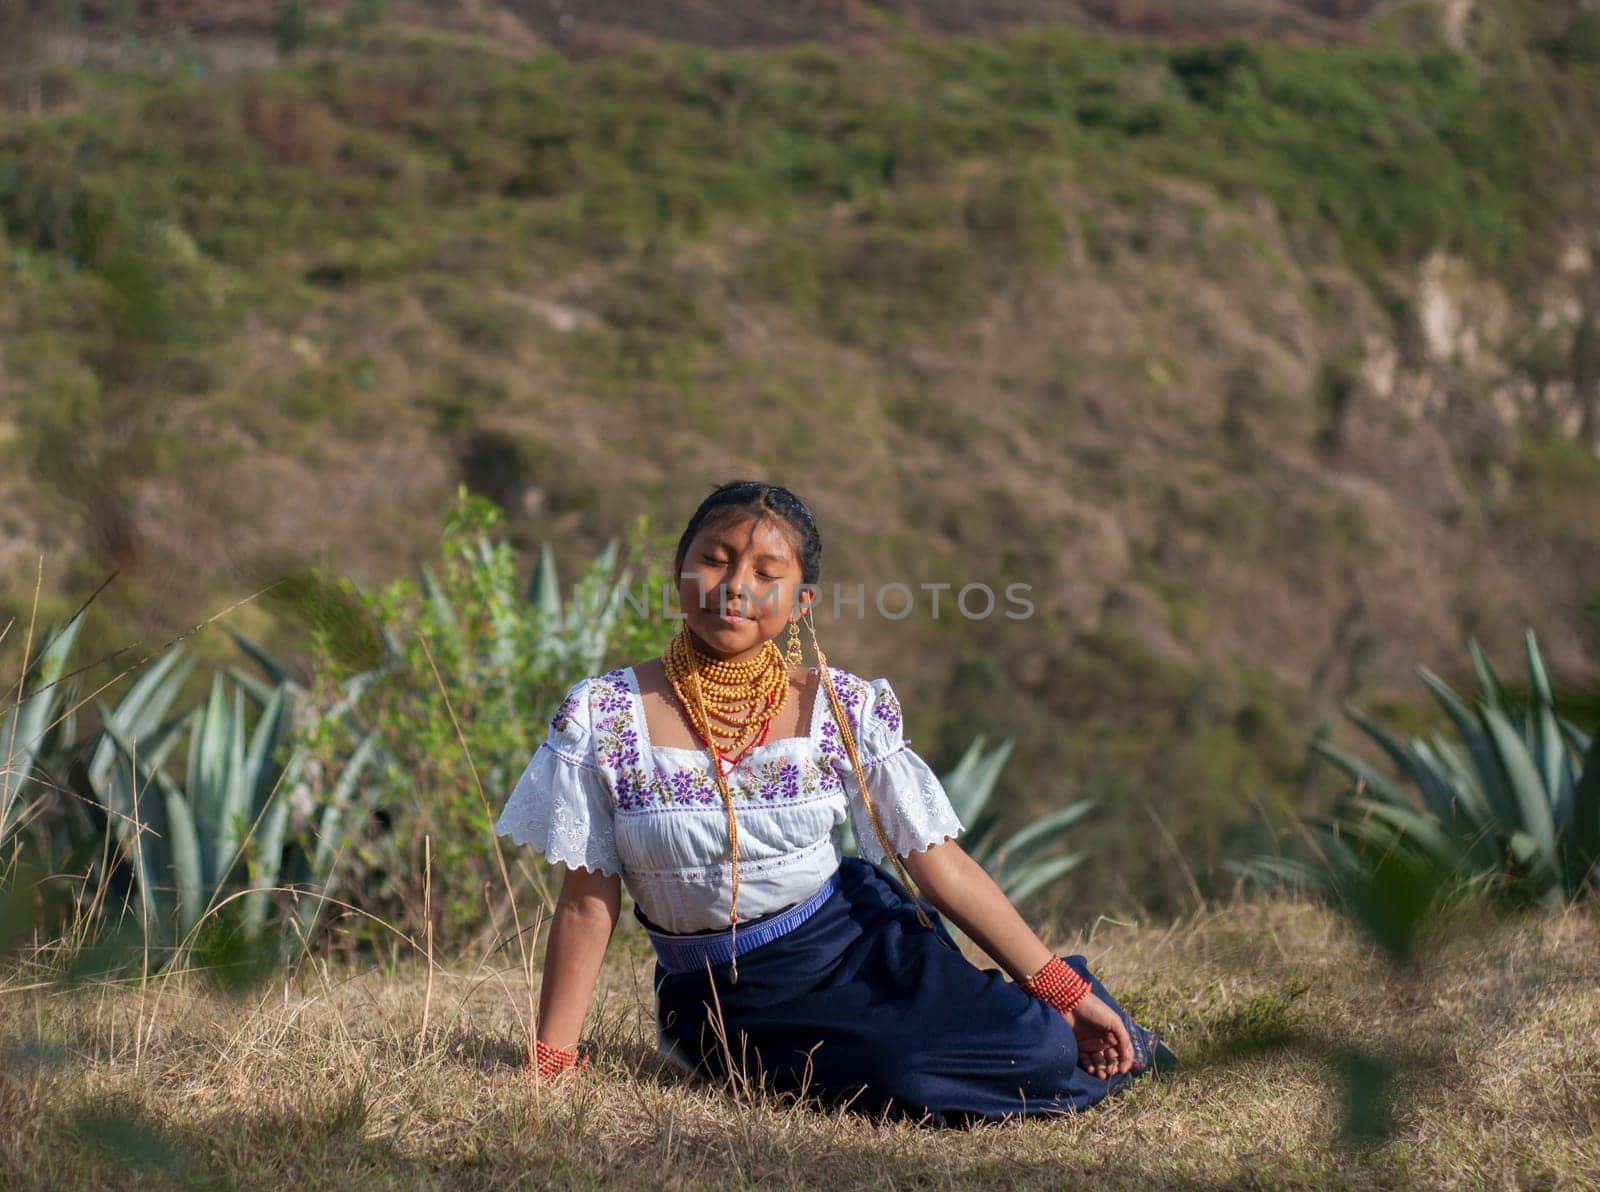 Wilderness Glam: 13-Year-Old Ecuadorian Rocking Traditional Threads and Vintage Gold Bling in the Jungle by Raulmartin